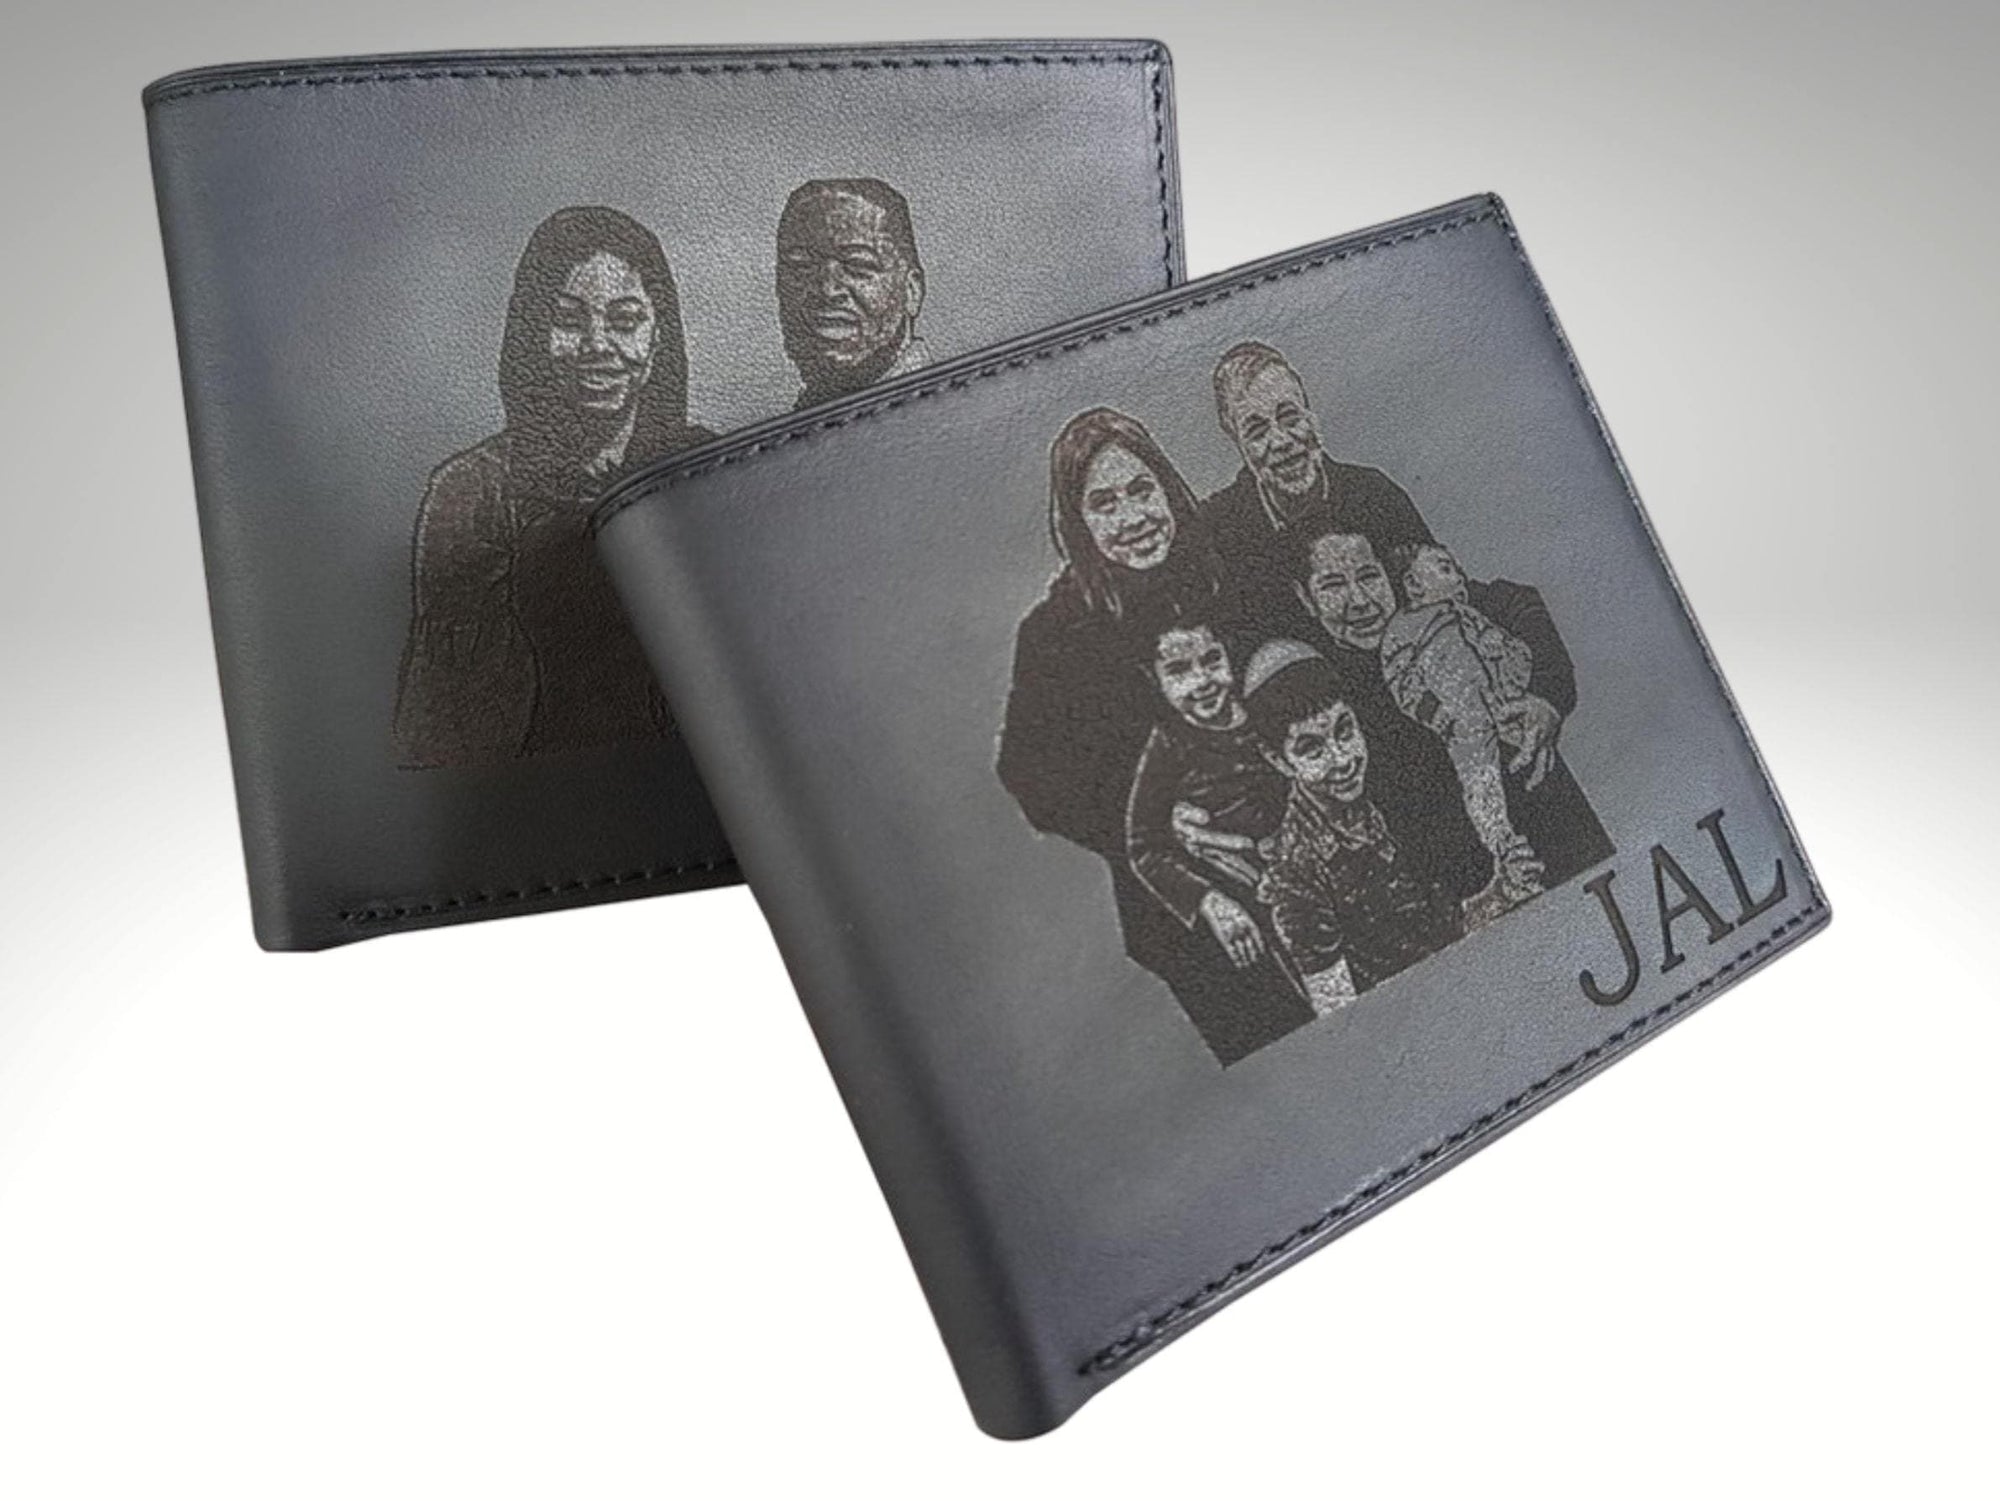 Father's Day Photo Wallet